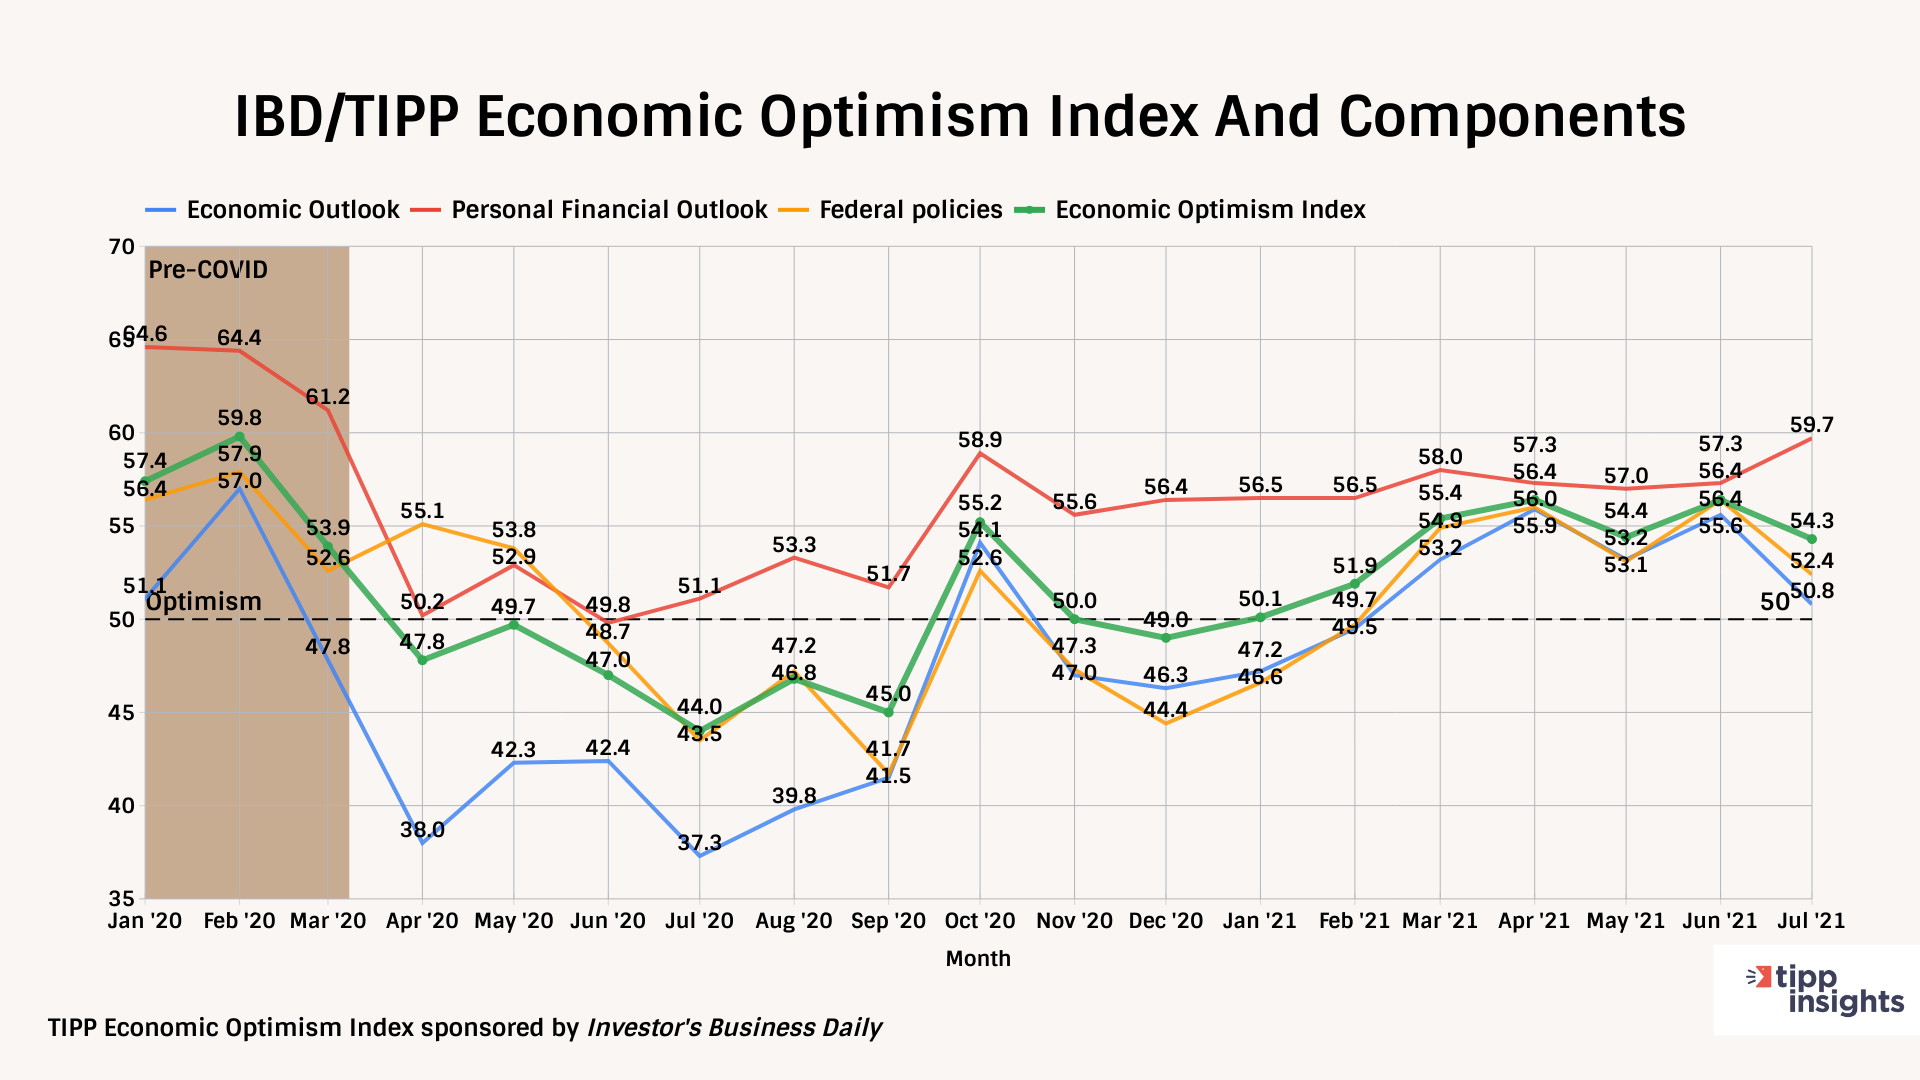 IBD/TIPP Economic Optimism Index And Components for July 2021